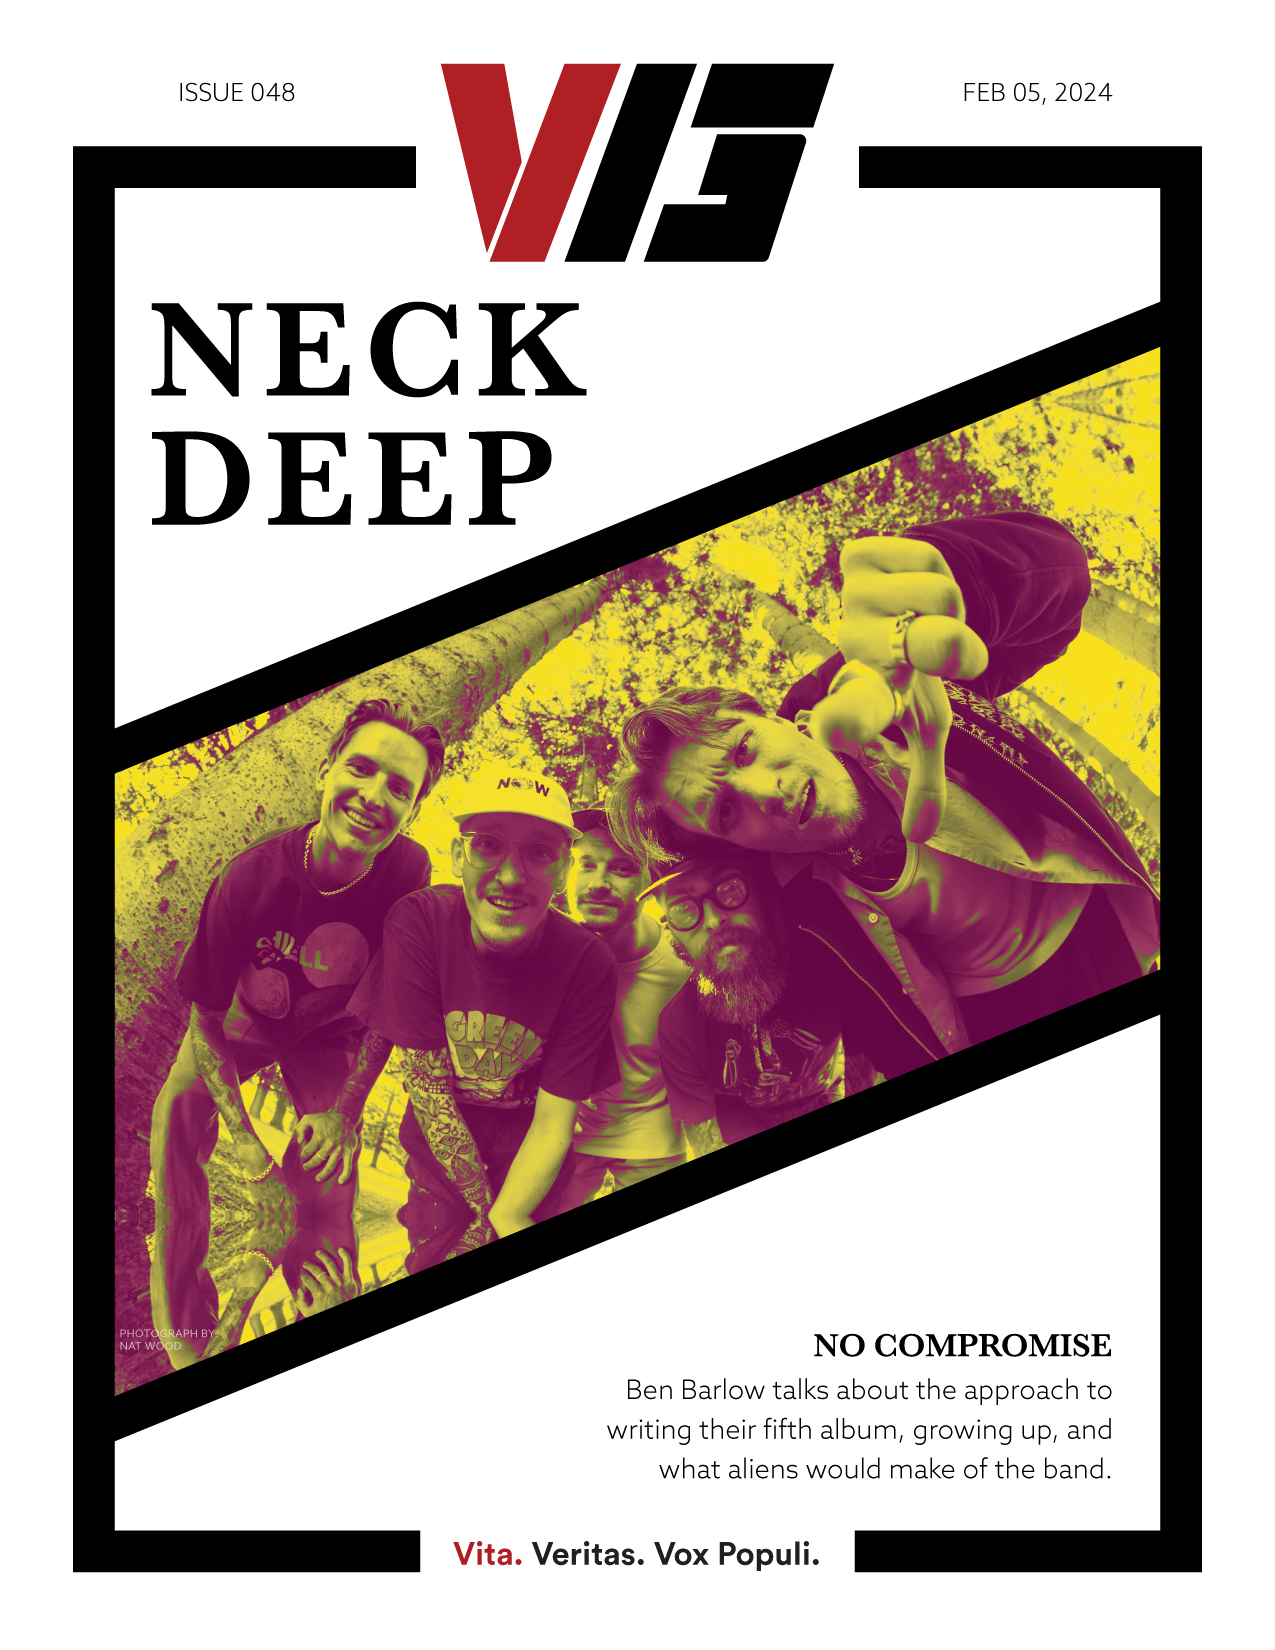 V13 Cover Story - Issue 048 - Neck Deep